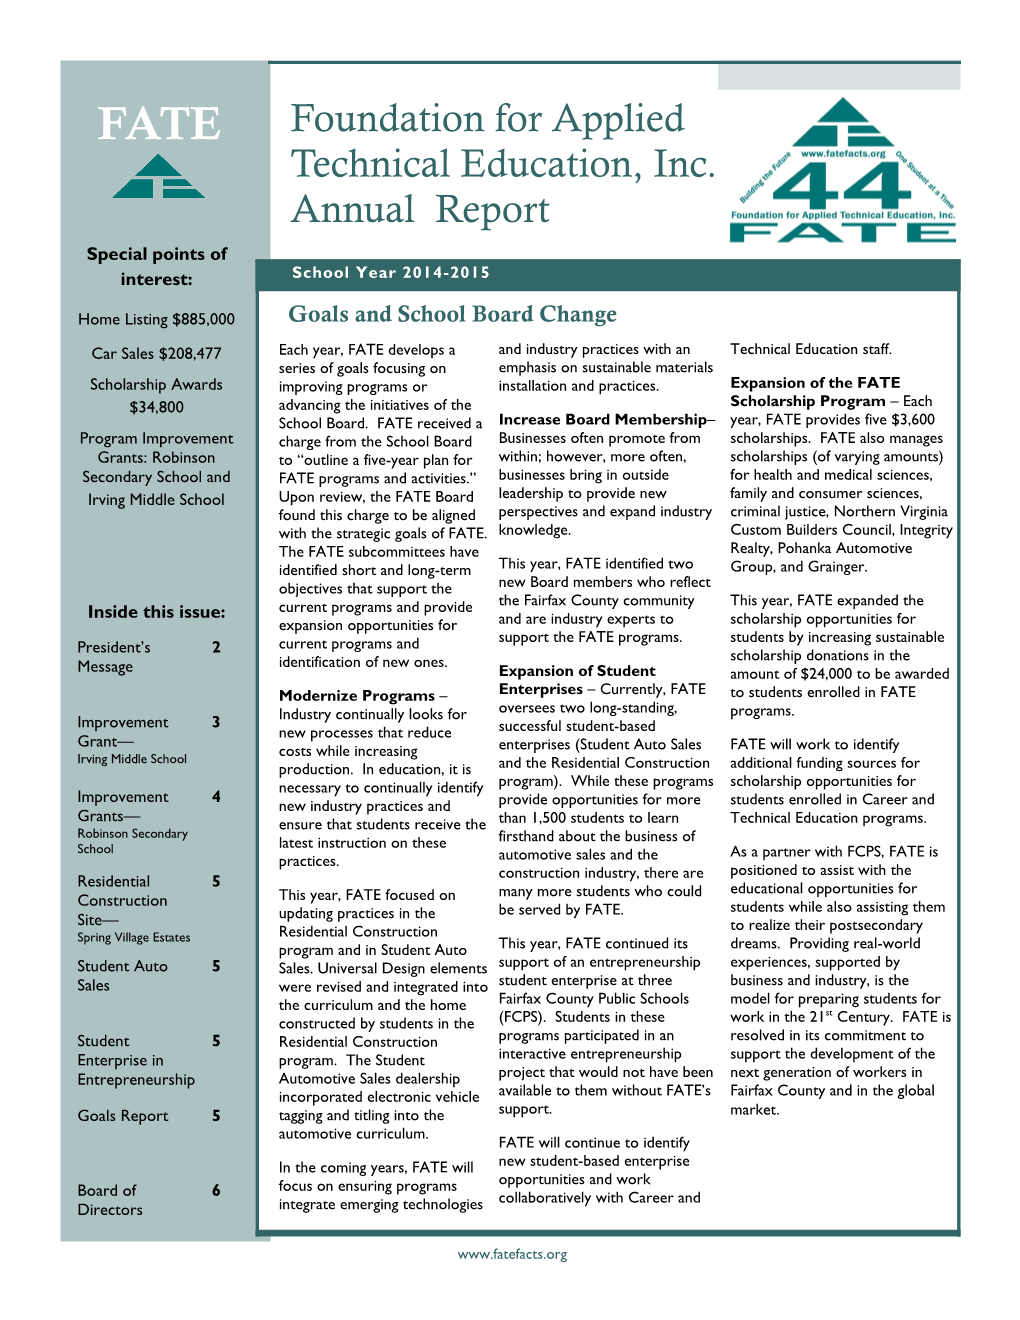 Foundation for Applied Technical Education, Inc. Annual Report Special Points of Interest: School Year 2014-2015